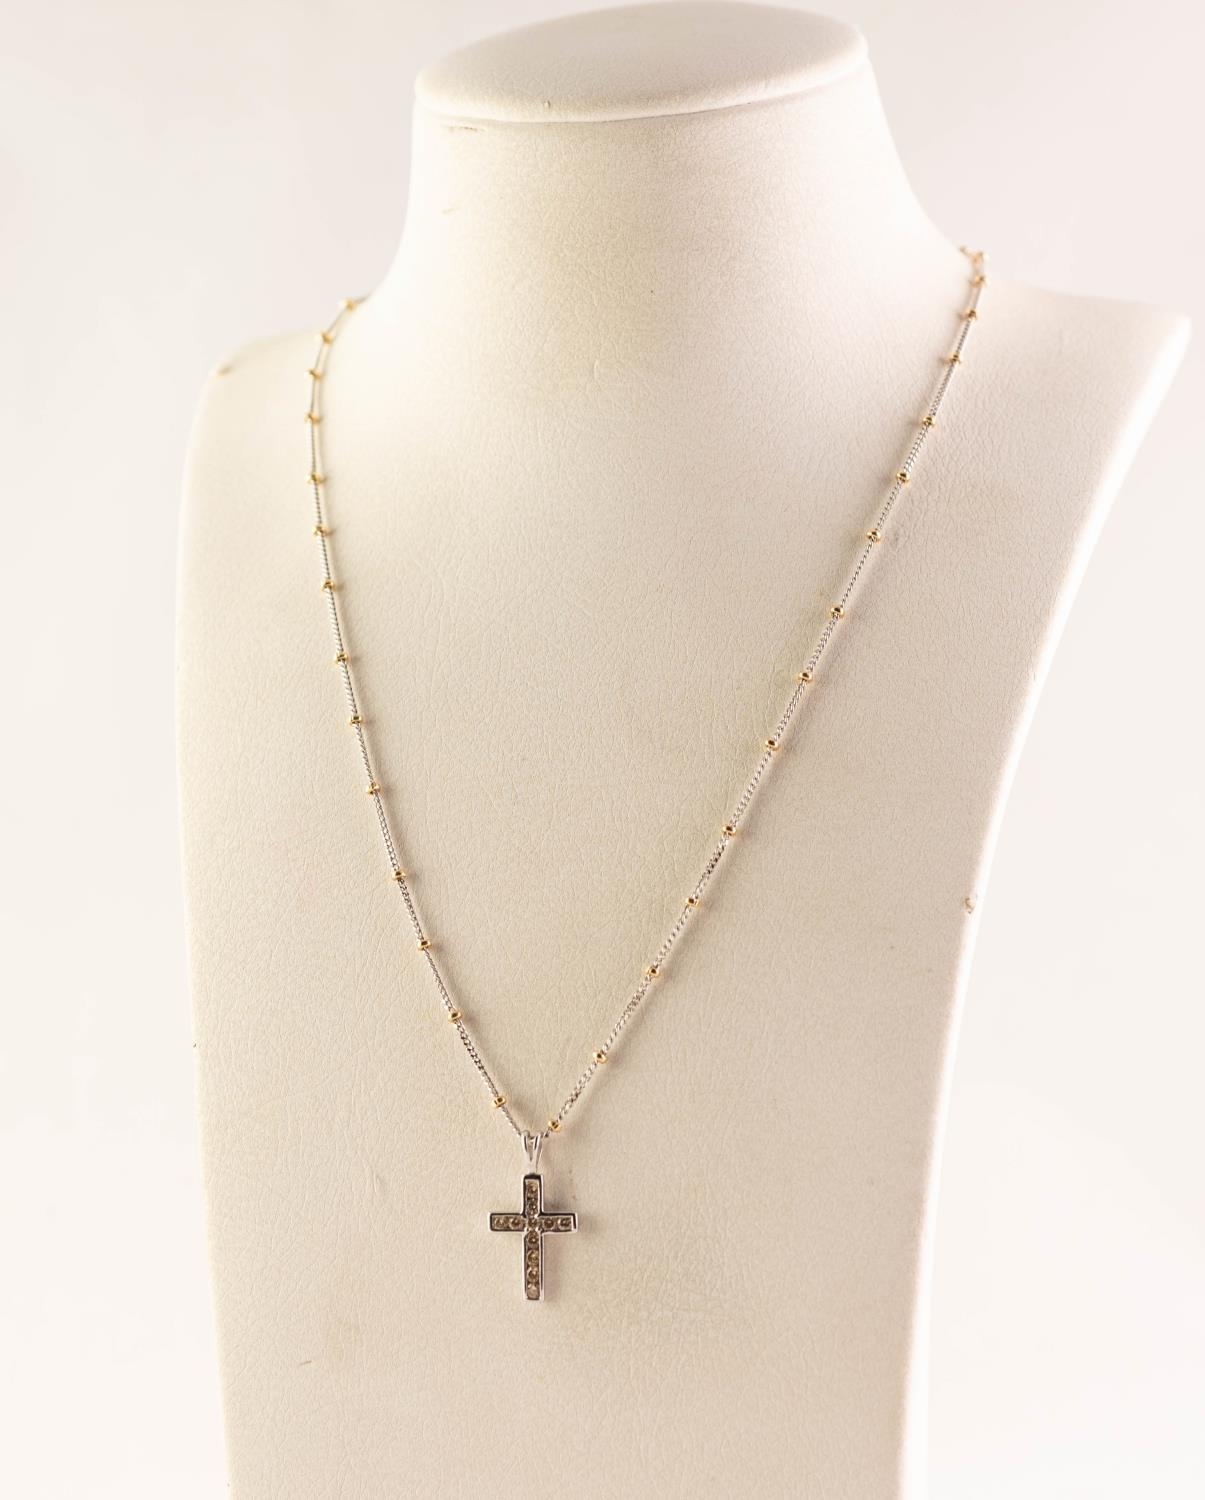 18ct WHITE GOLD TINY DIAMOND SET CRUCIFIX PENDANT on an 18ct WHTIE AND YELLOW GOLD FINE CHAIN